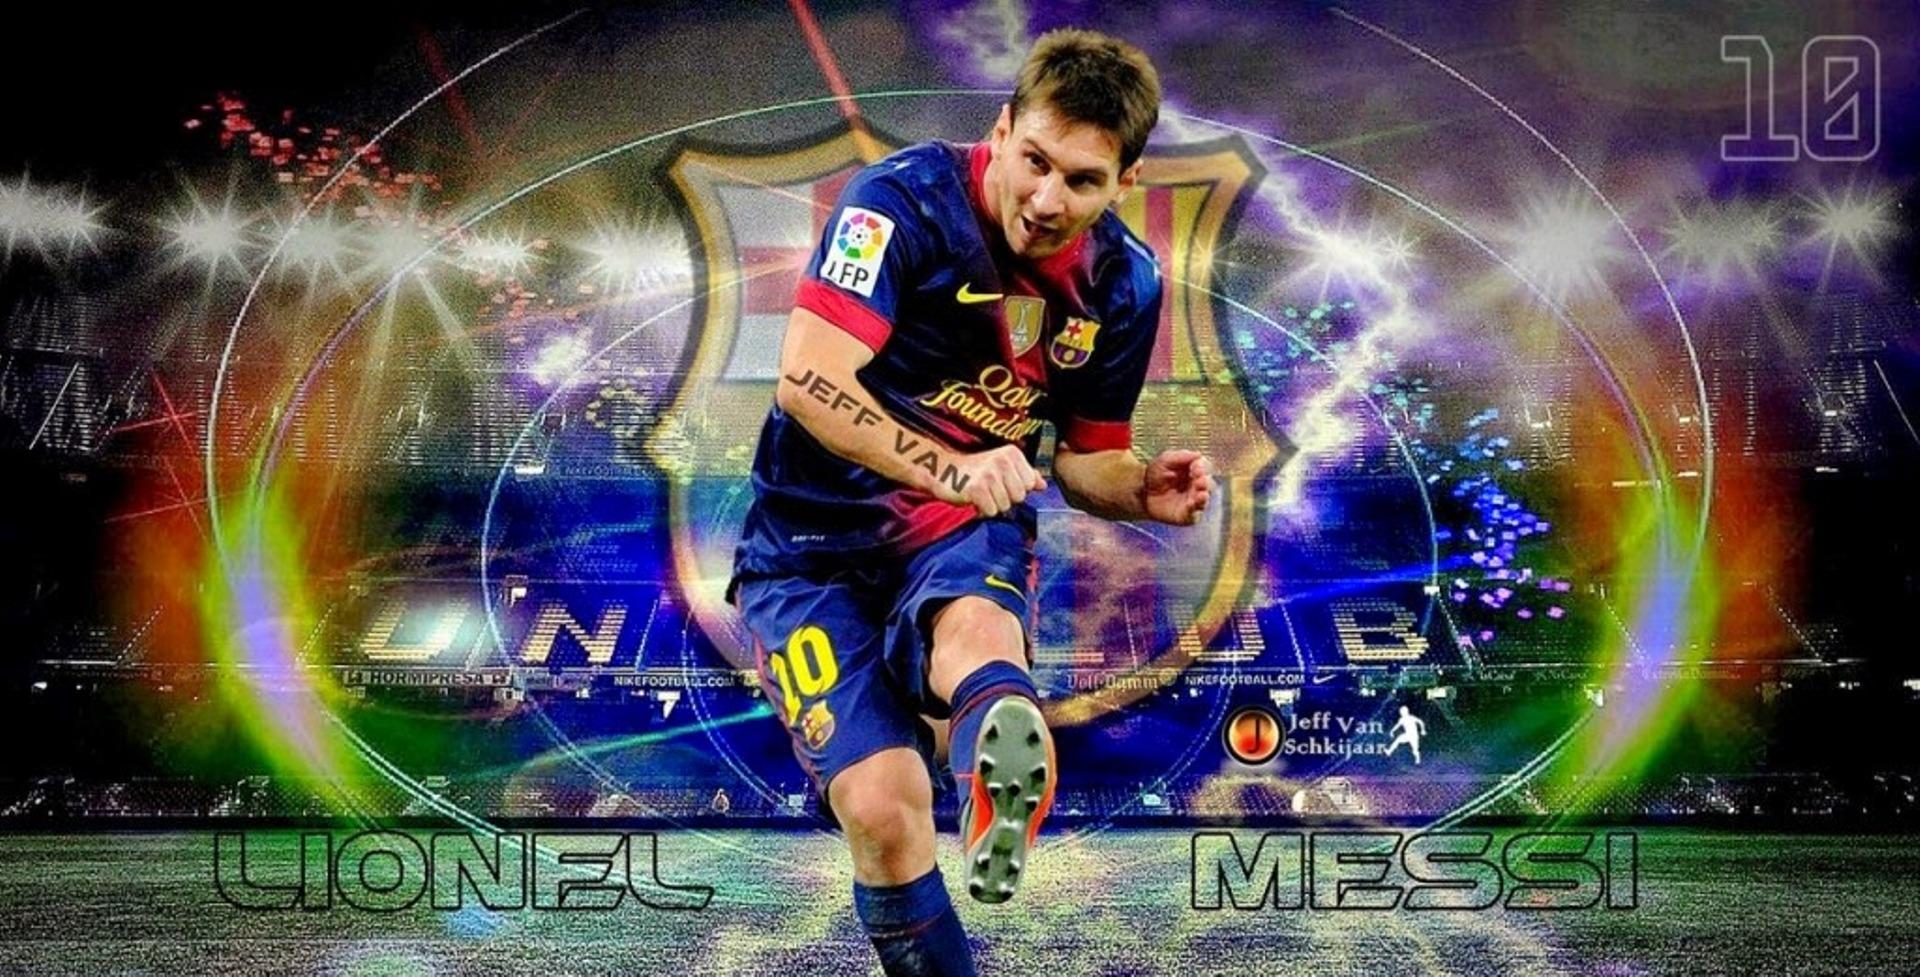 Lionel Messi 2014 2015 Barcelona Wallpapers Wallpaper For HD